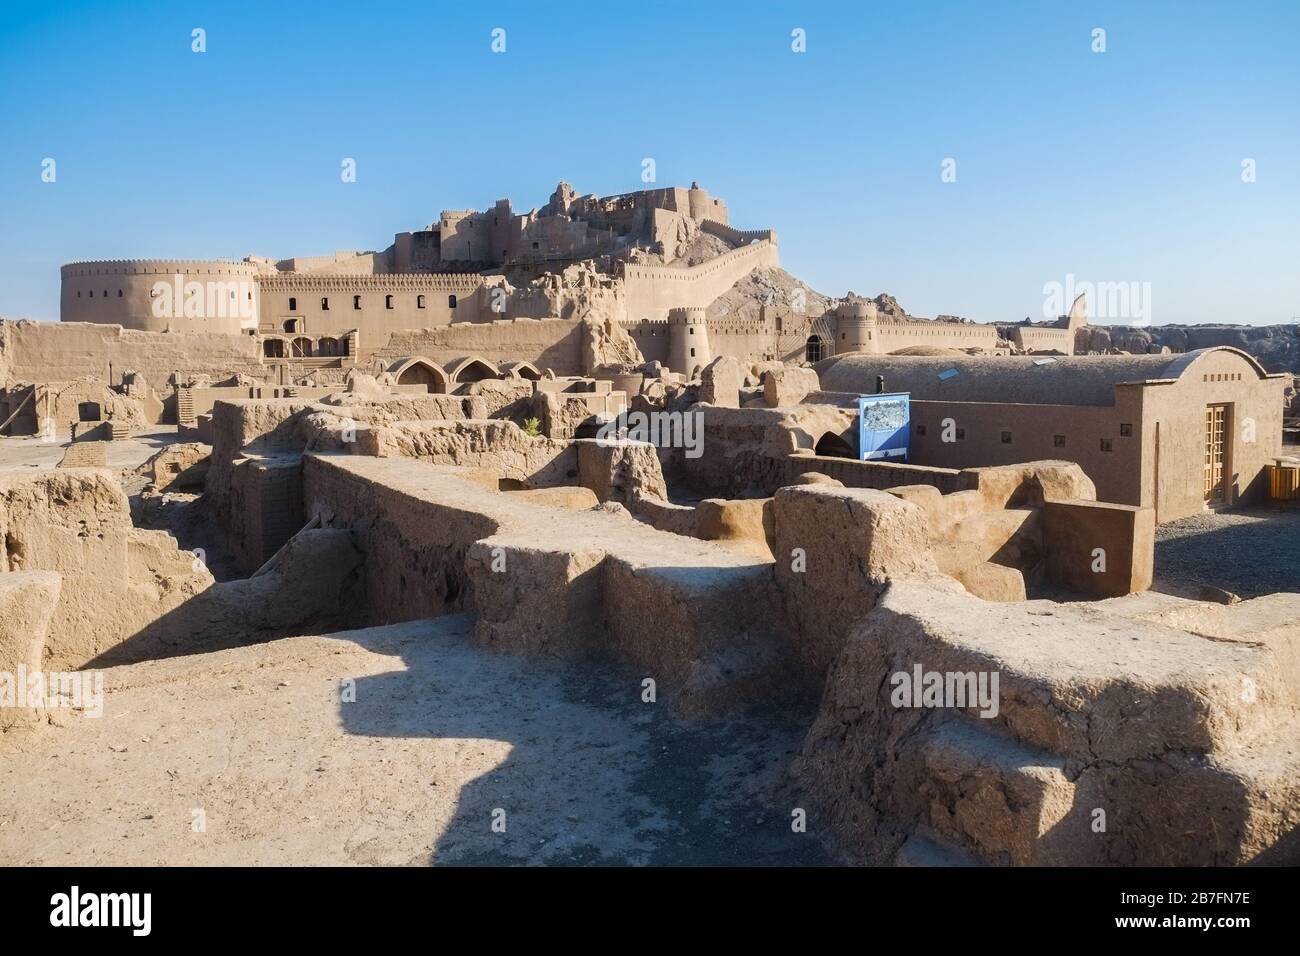 Landscape view of Arg e Bam, ruin and ancient Persian historical site. Famous travel landmark Kerman province, Iran Stock Photo